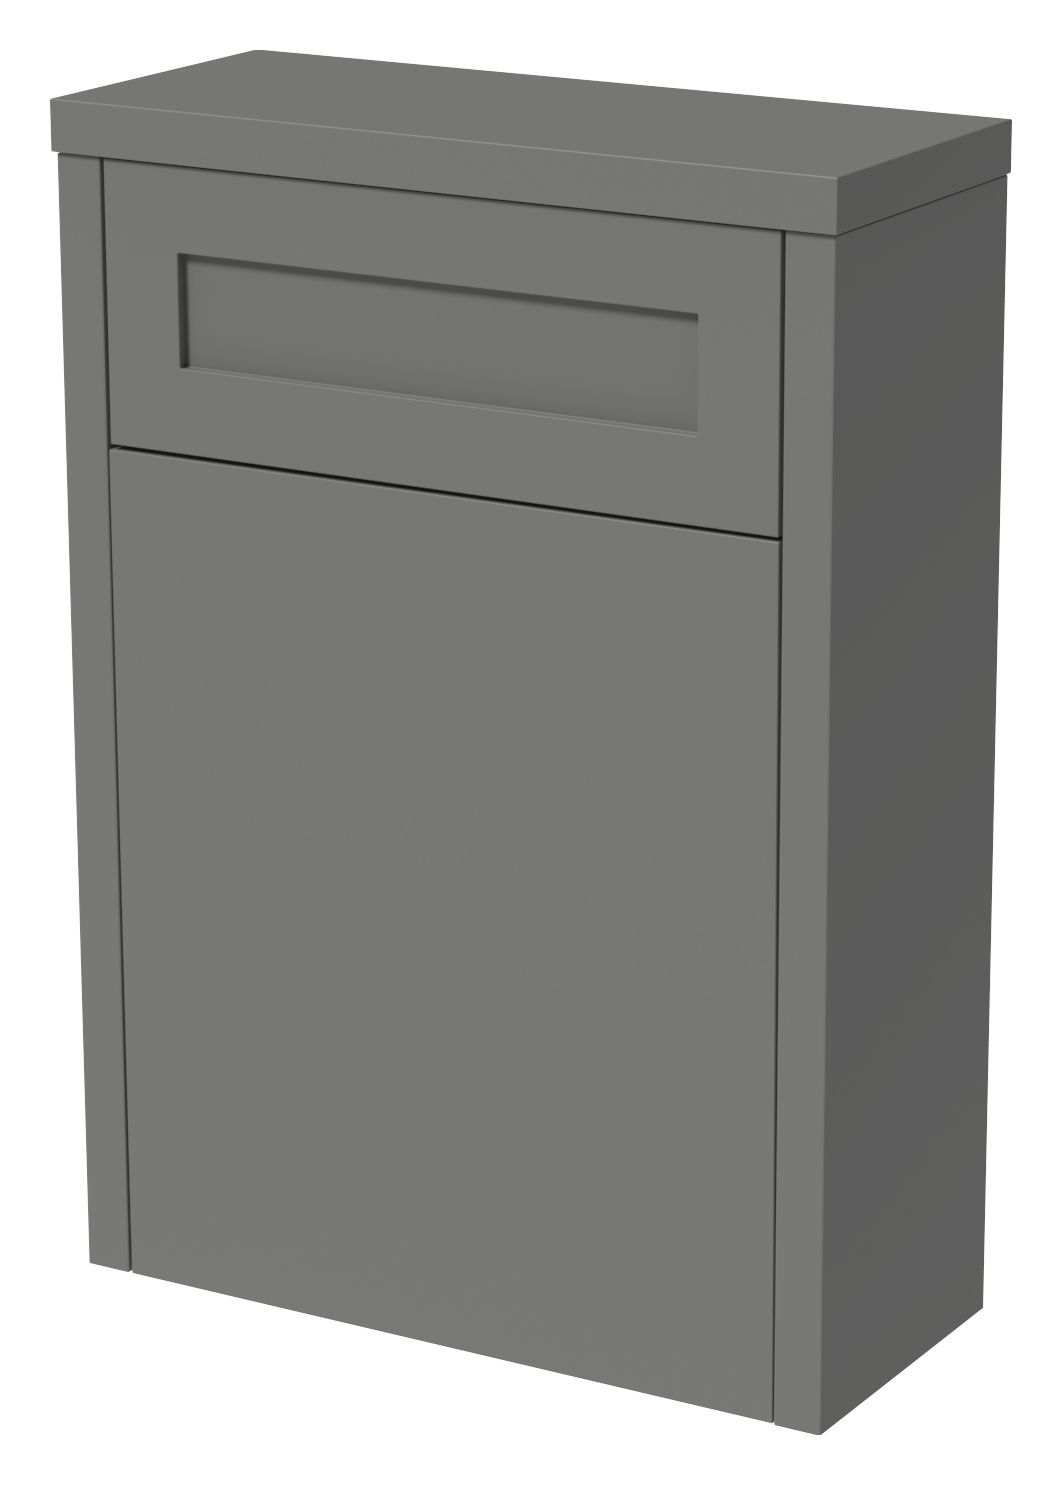 Image of Wickes Hayman Dove Grey Traditional Freestanding Toilet Unit - 870 x 600mm